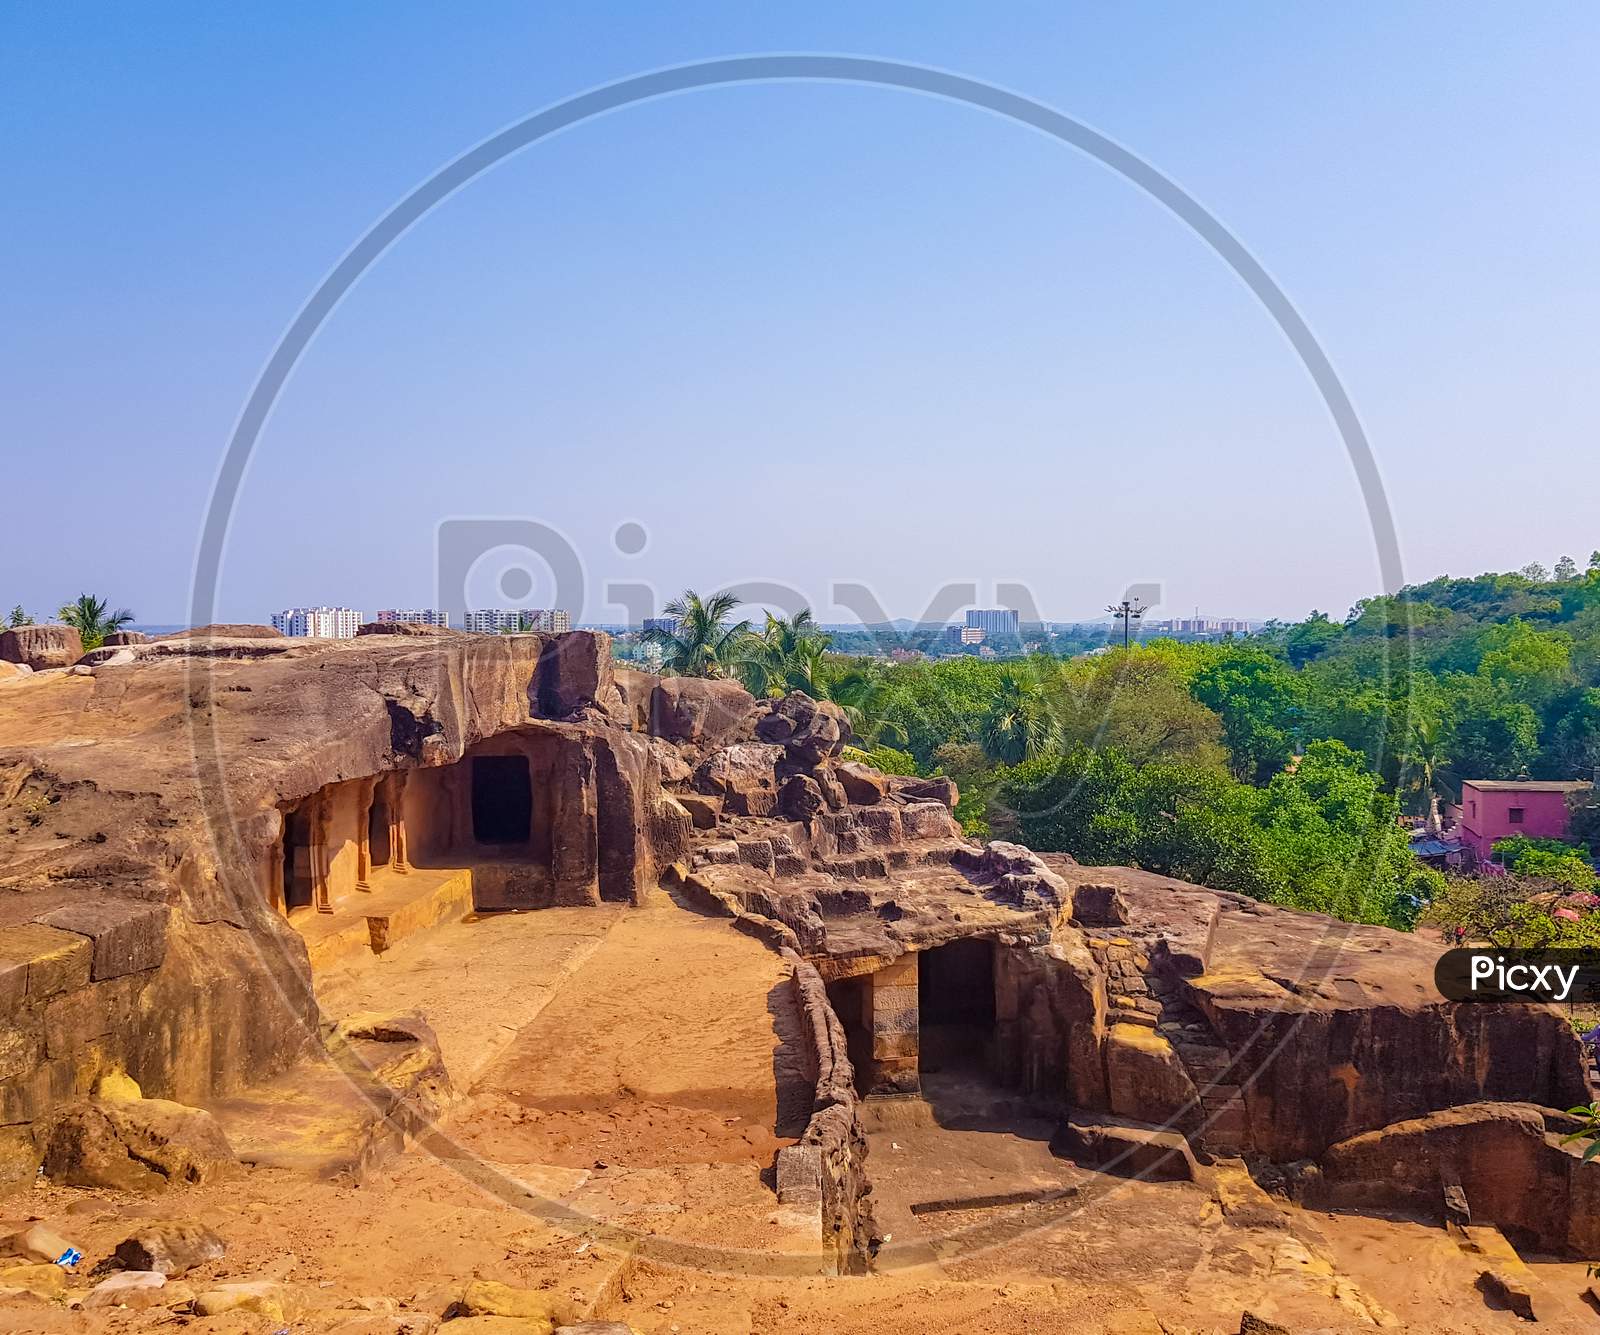 Udayagiri And Khandagiri Caves, Formerly Called Kattaka Caves Or Cuttack Caves, Are Partly Natural And Partly Artificial Caves Of Archaeological, Historical And Religious Importance Near The City Of Bhubaneswar In Odisha, India